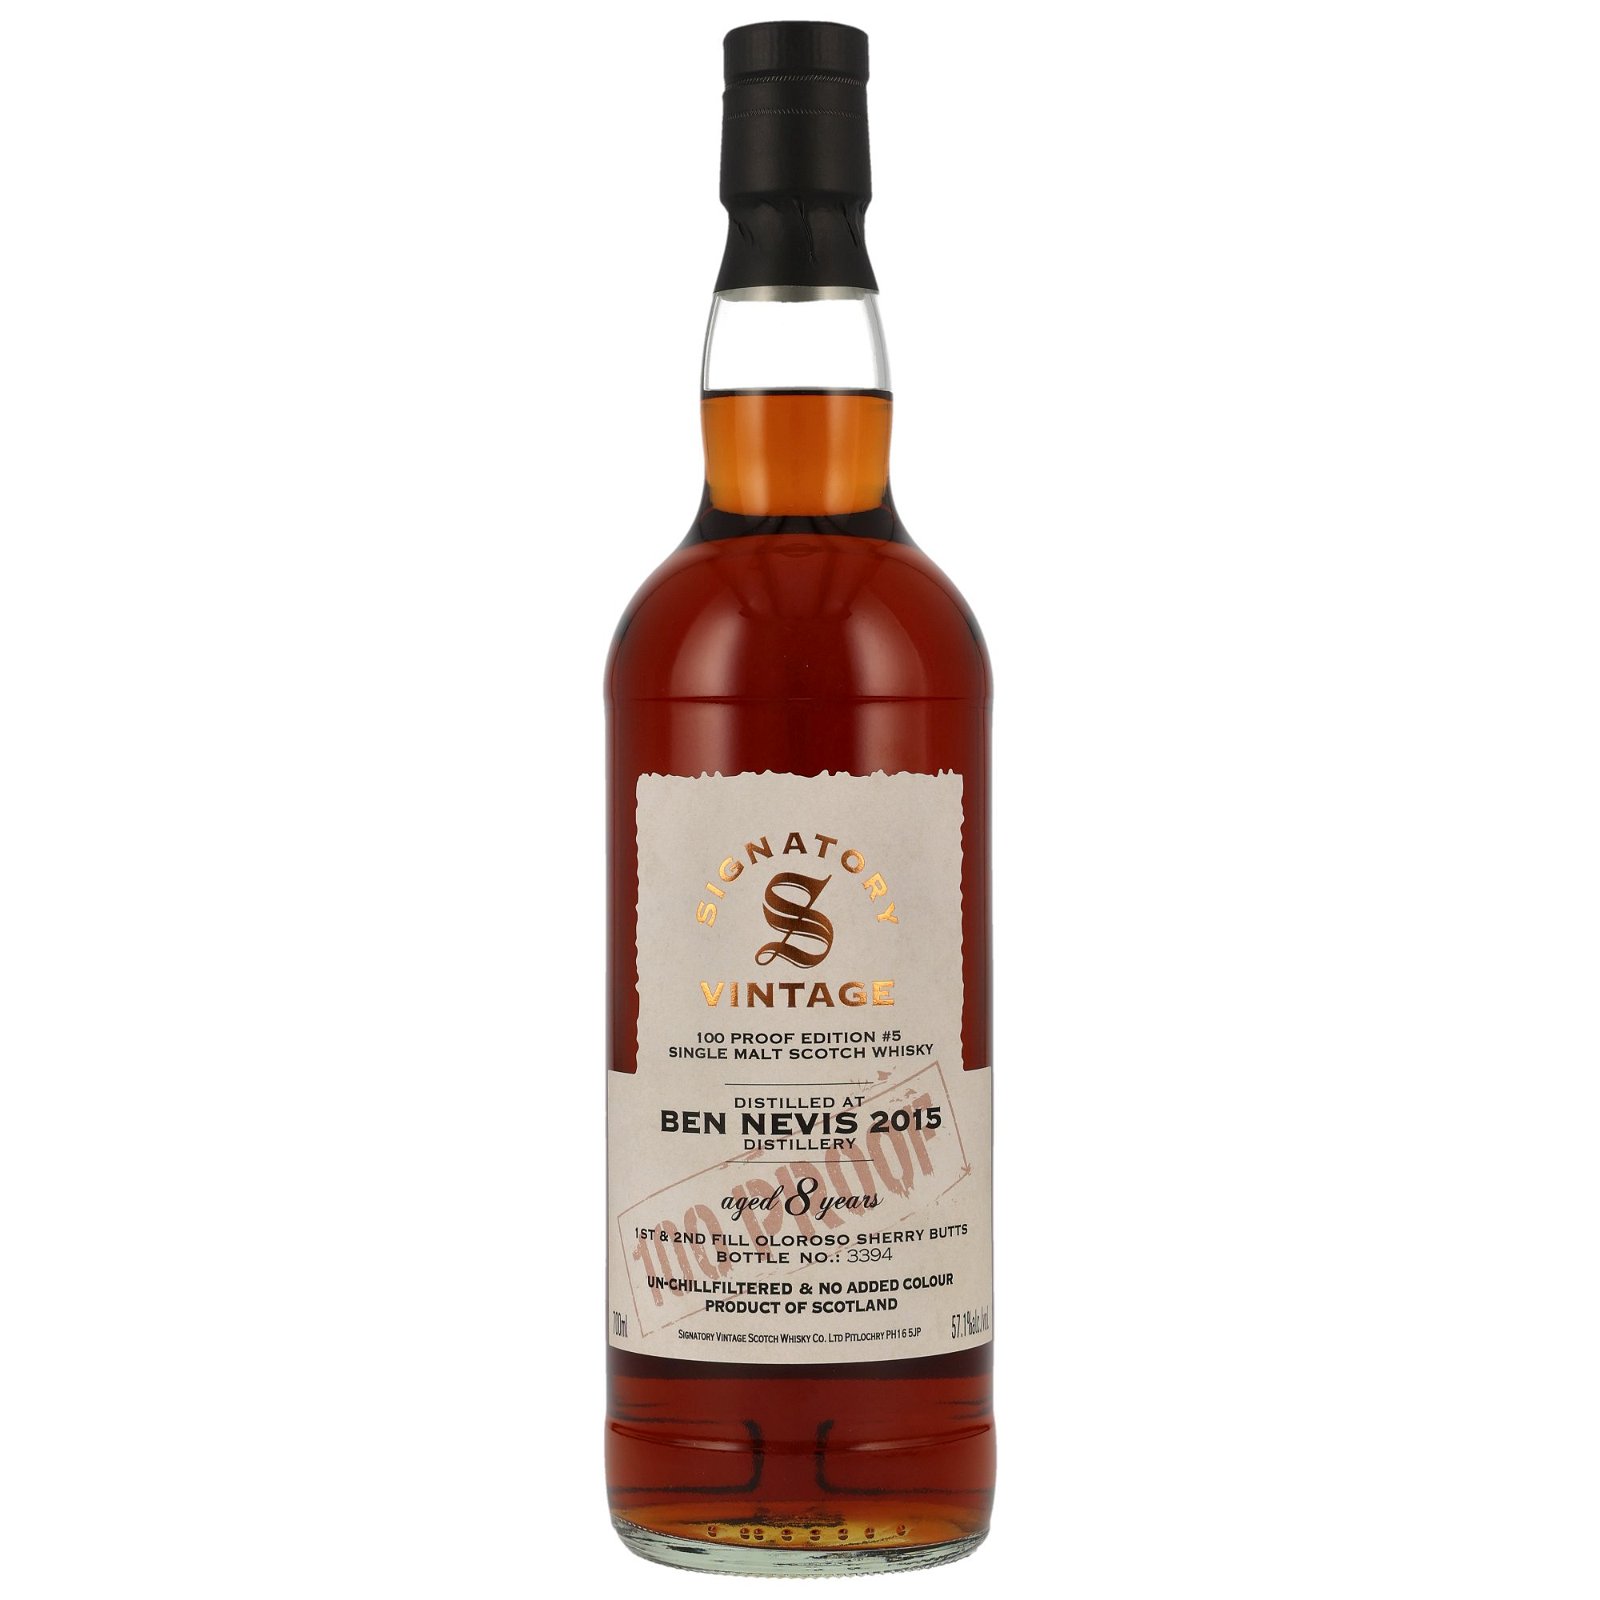 Ben Nevis 2015 - 8 Jahre 1st & 2nd Fill Oloroso Sherry Butts 100 Proof Edition #5 (Signatory)